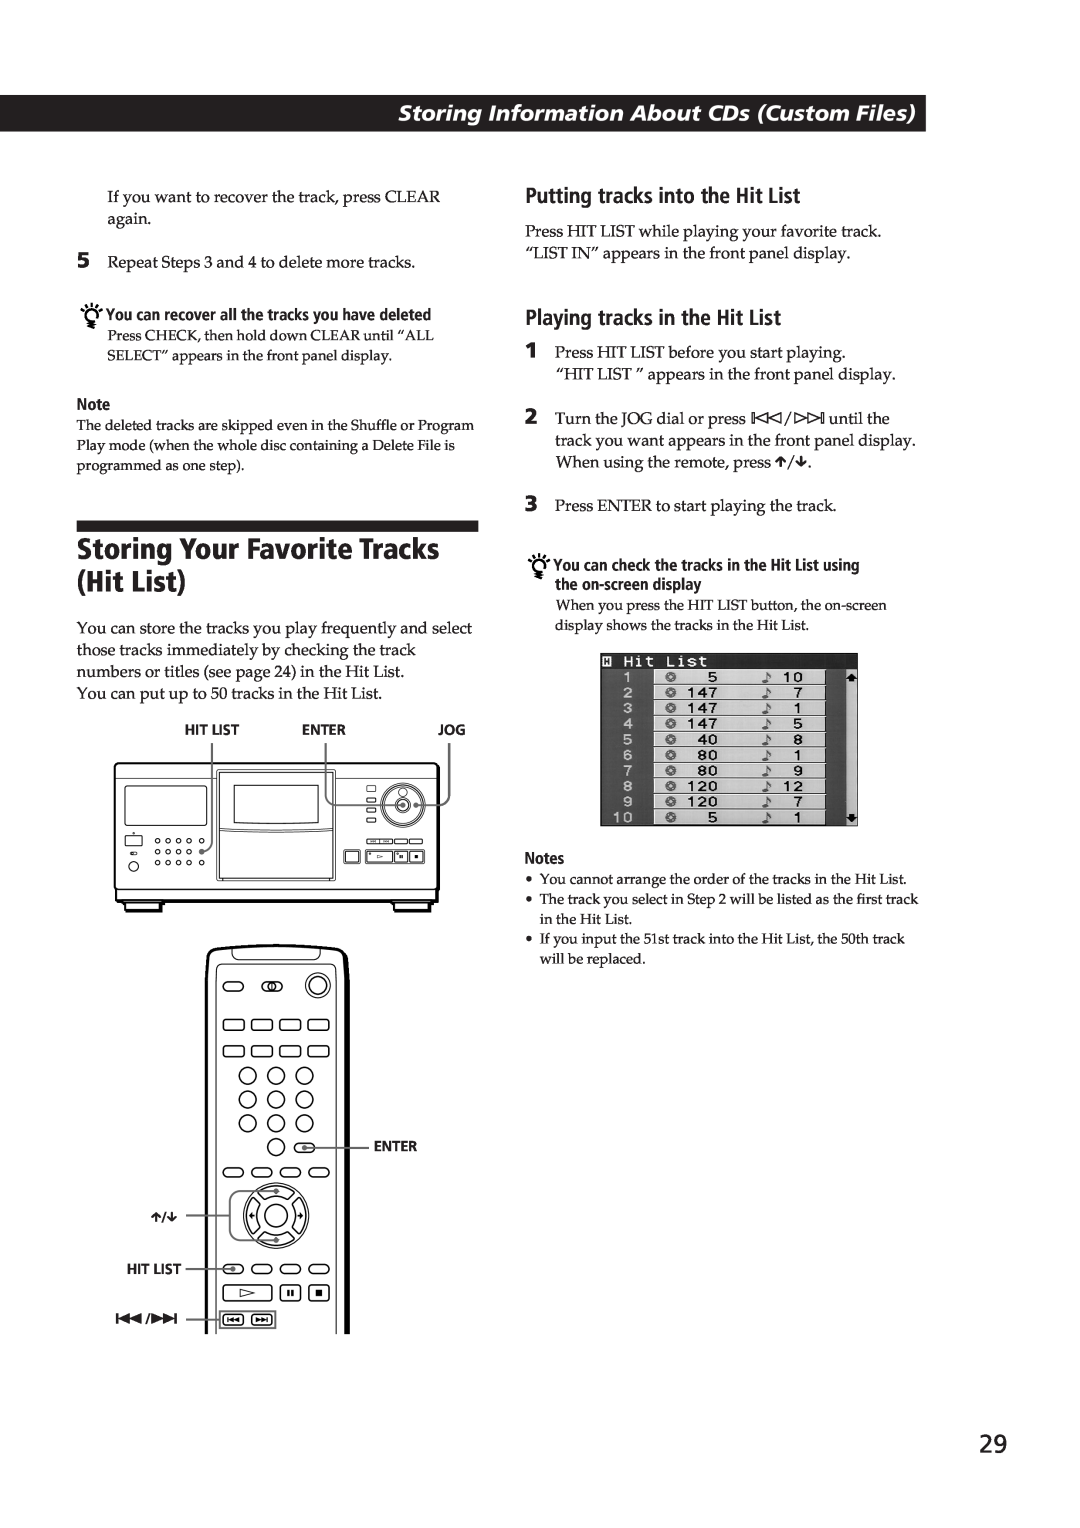 Sony Ericsson CDP-CX270 manual Storing Your Favorite Tracks Hit List, Putting tracks into the Hit List 